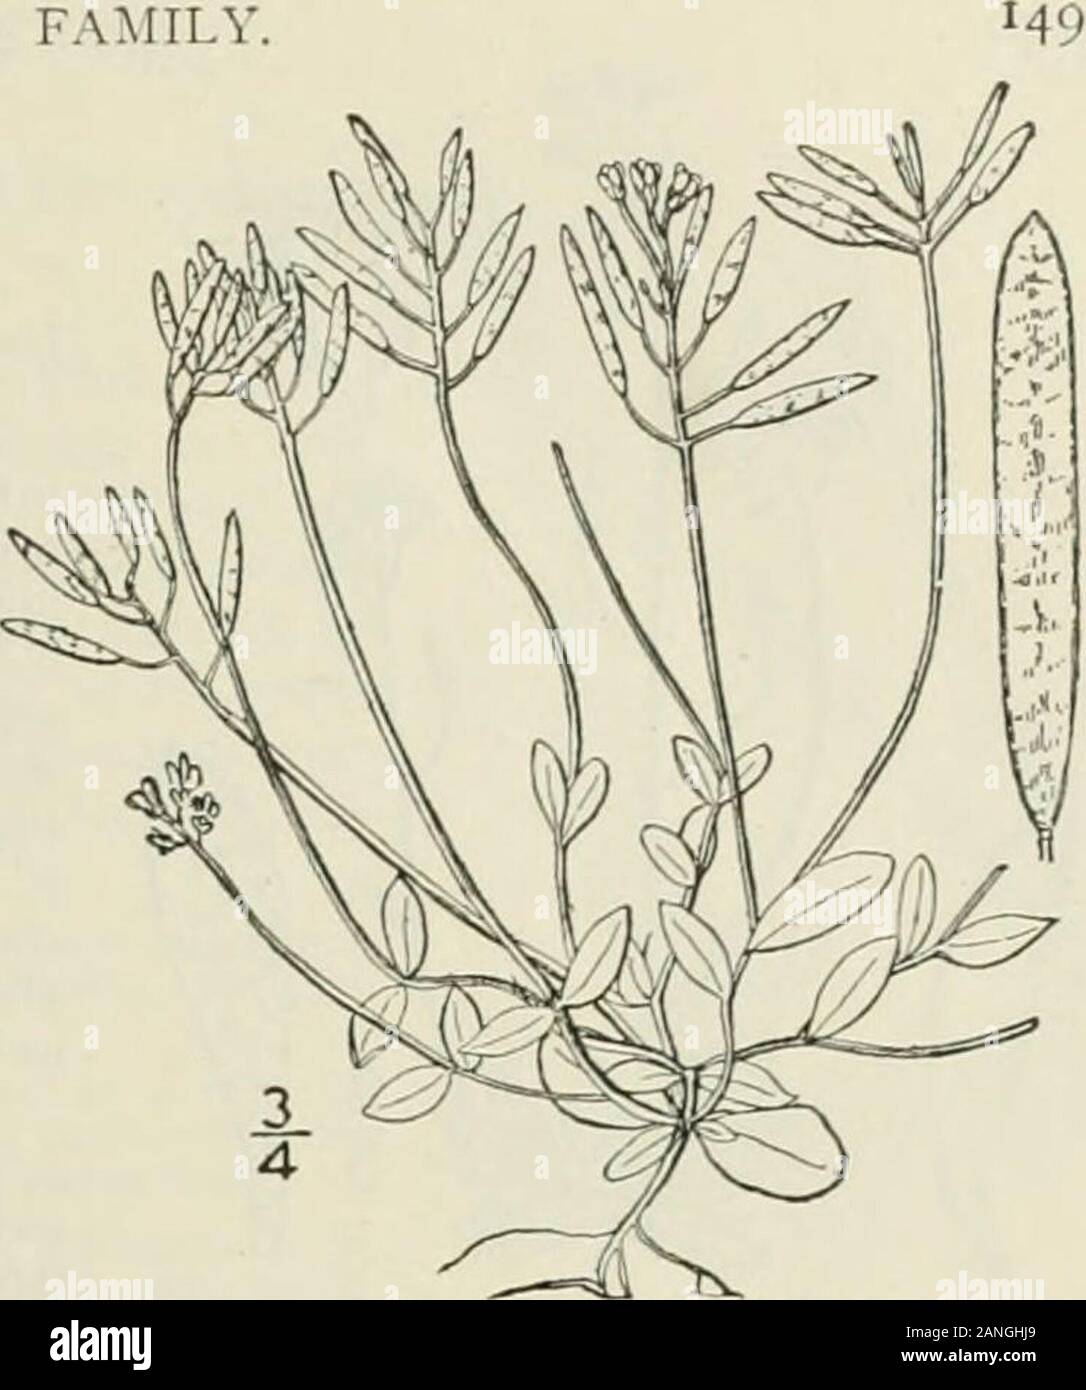 An illustrated flora of the northern United States, Canada and the British possessions : from Newfoundland to the parallel of the southern boundary of Virginia and from the Atlantic Ocean westward to the 102nd meridian; 2nd ed. . Genus i. MUSTARD FAMILY. 2. Draba caroliniana ^^alt. Carolinahitlov-grass. Iig. 1998. Draba caroliniana Walt. FI. Car. 174. 1788.Draba hispiduta Miehx. Fl. Bor. Am. 2 : 28. 1803.Draba caroliniana niicrantha A, Gray, Man. Ed, 5, 72- 186-.Draba niicrantha Nutt.; T. & G. Fl. N. A. i : 109. 1838. Winter-annual, the flowering scapes l-5high from a short leafy stem. Leav Stock Photo